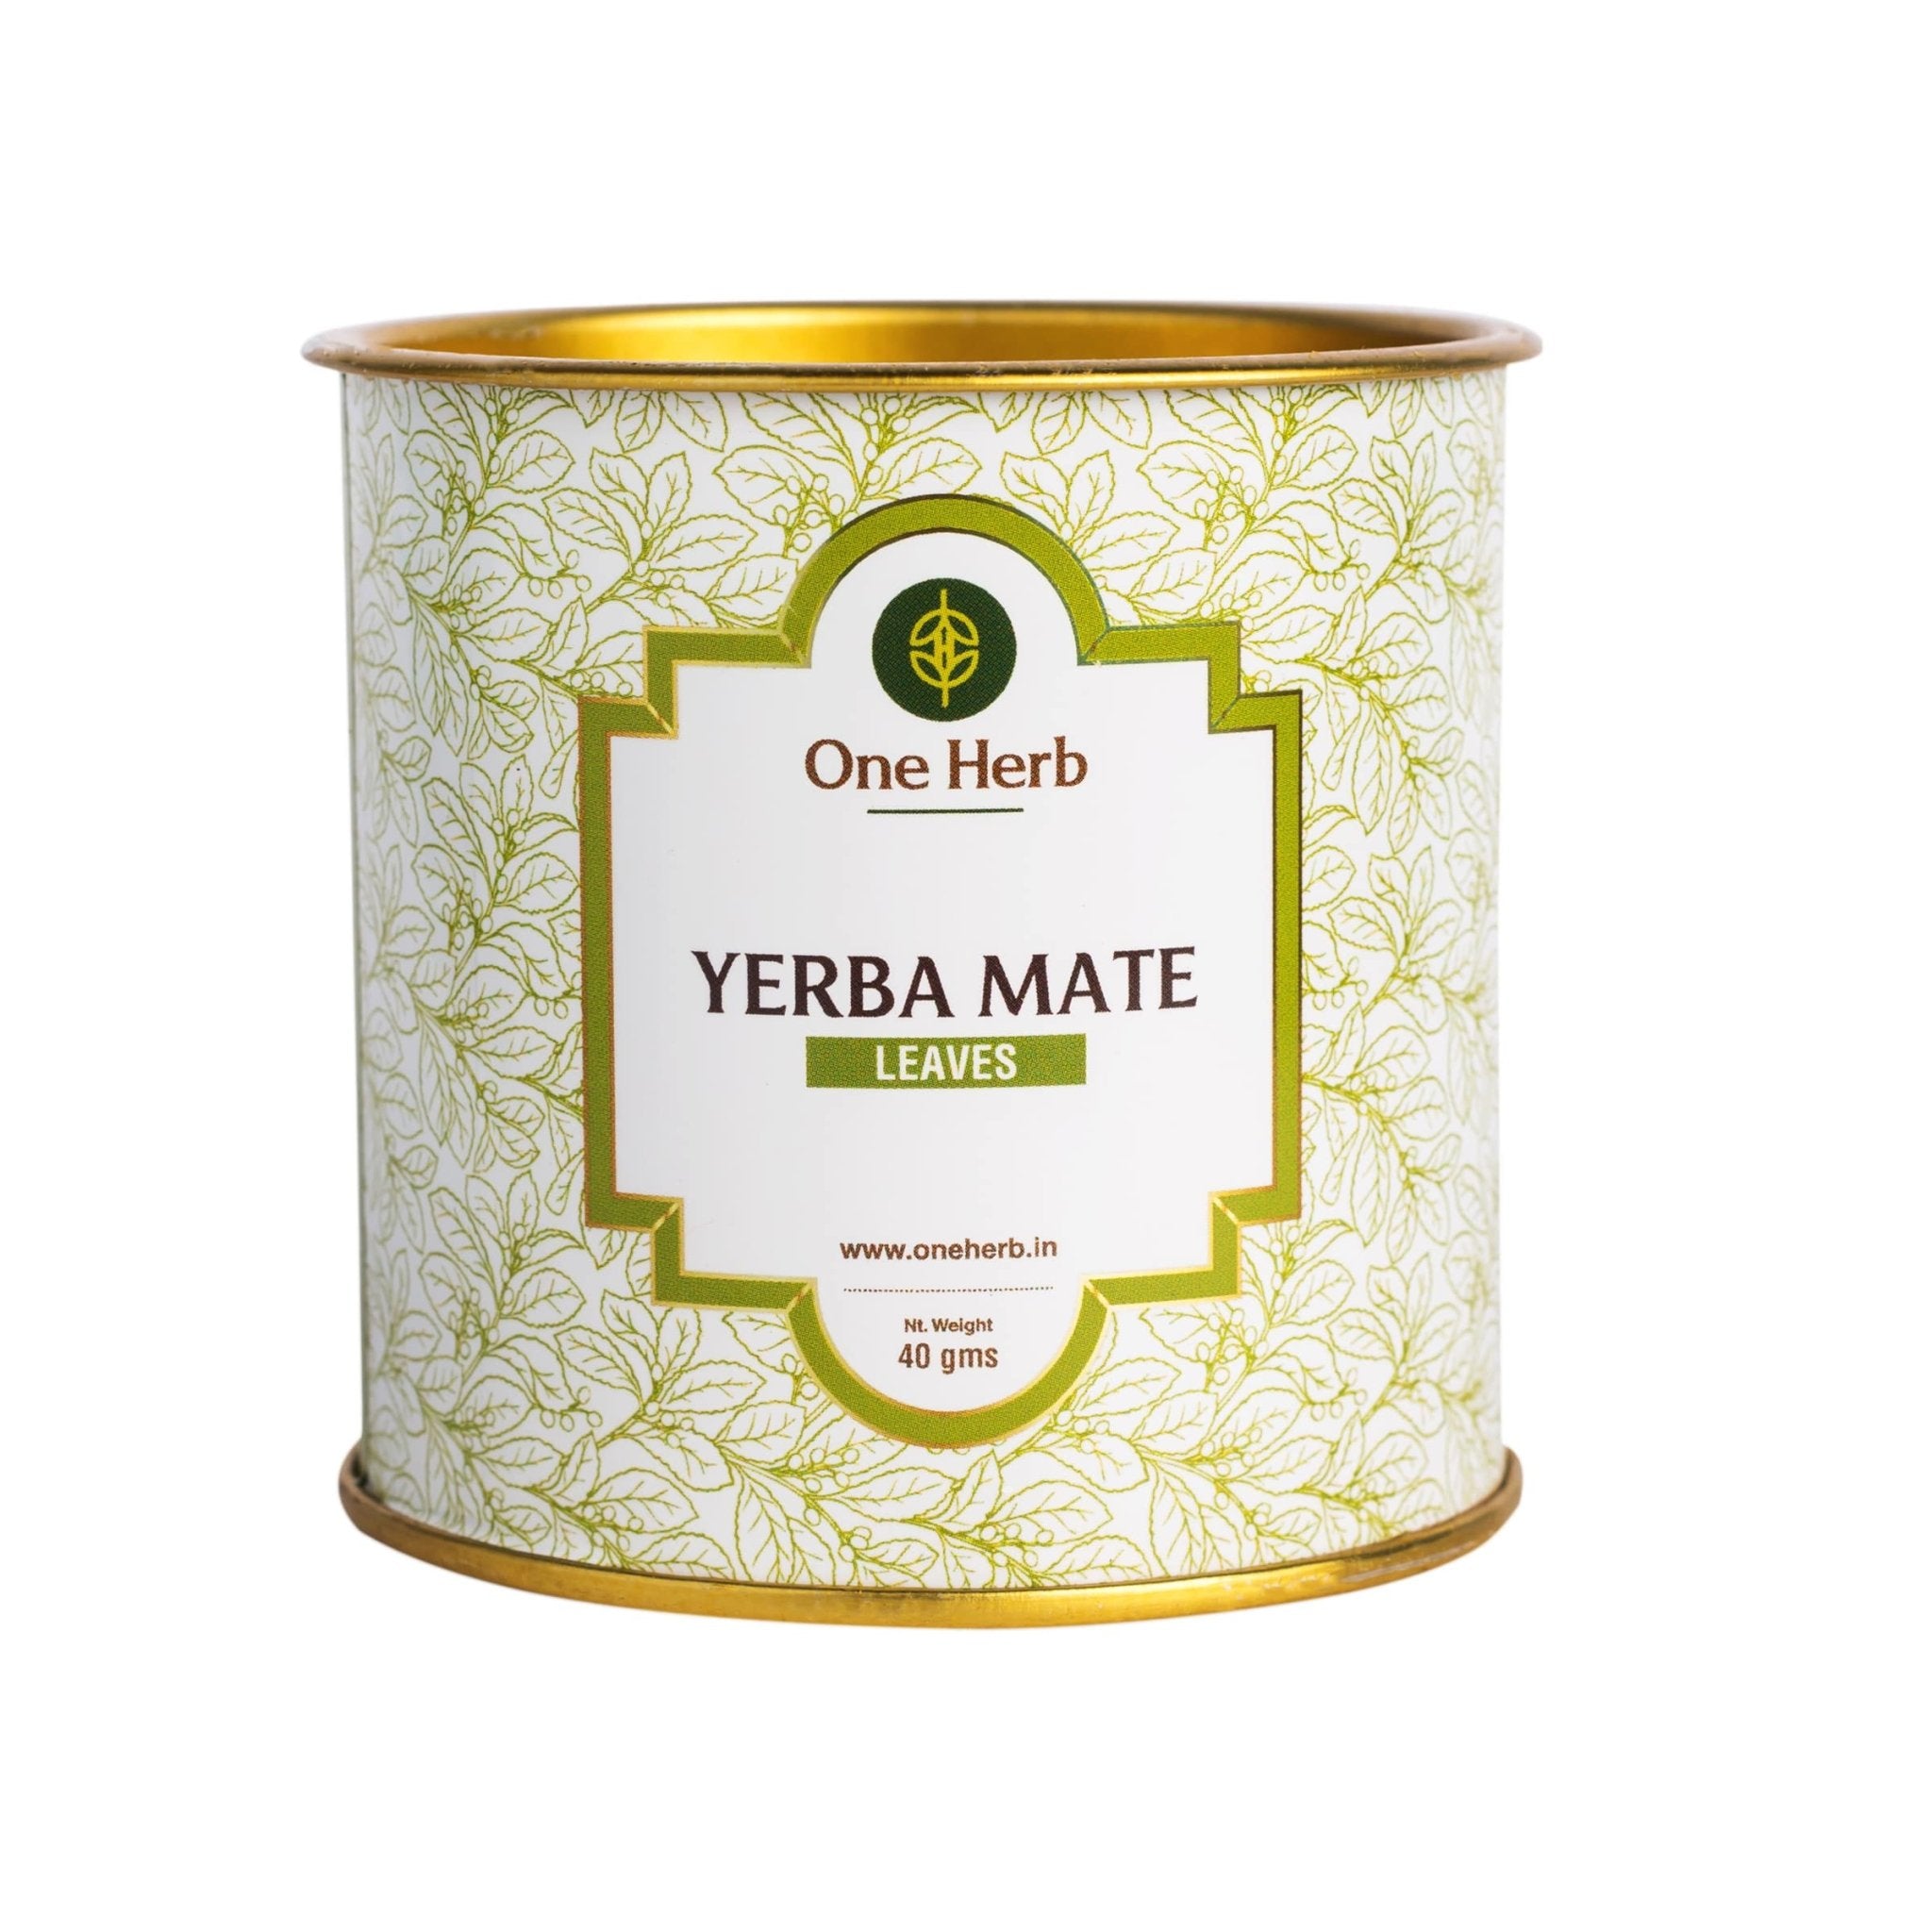 Yerba Mate: the health benefits of the South American Superfood, mate the 